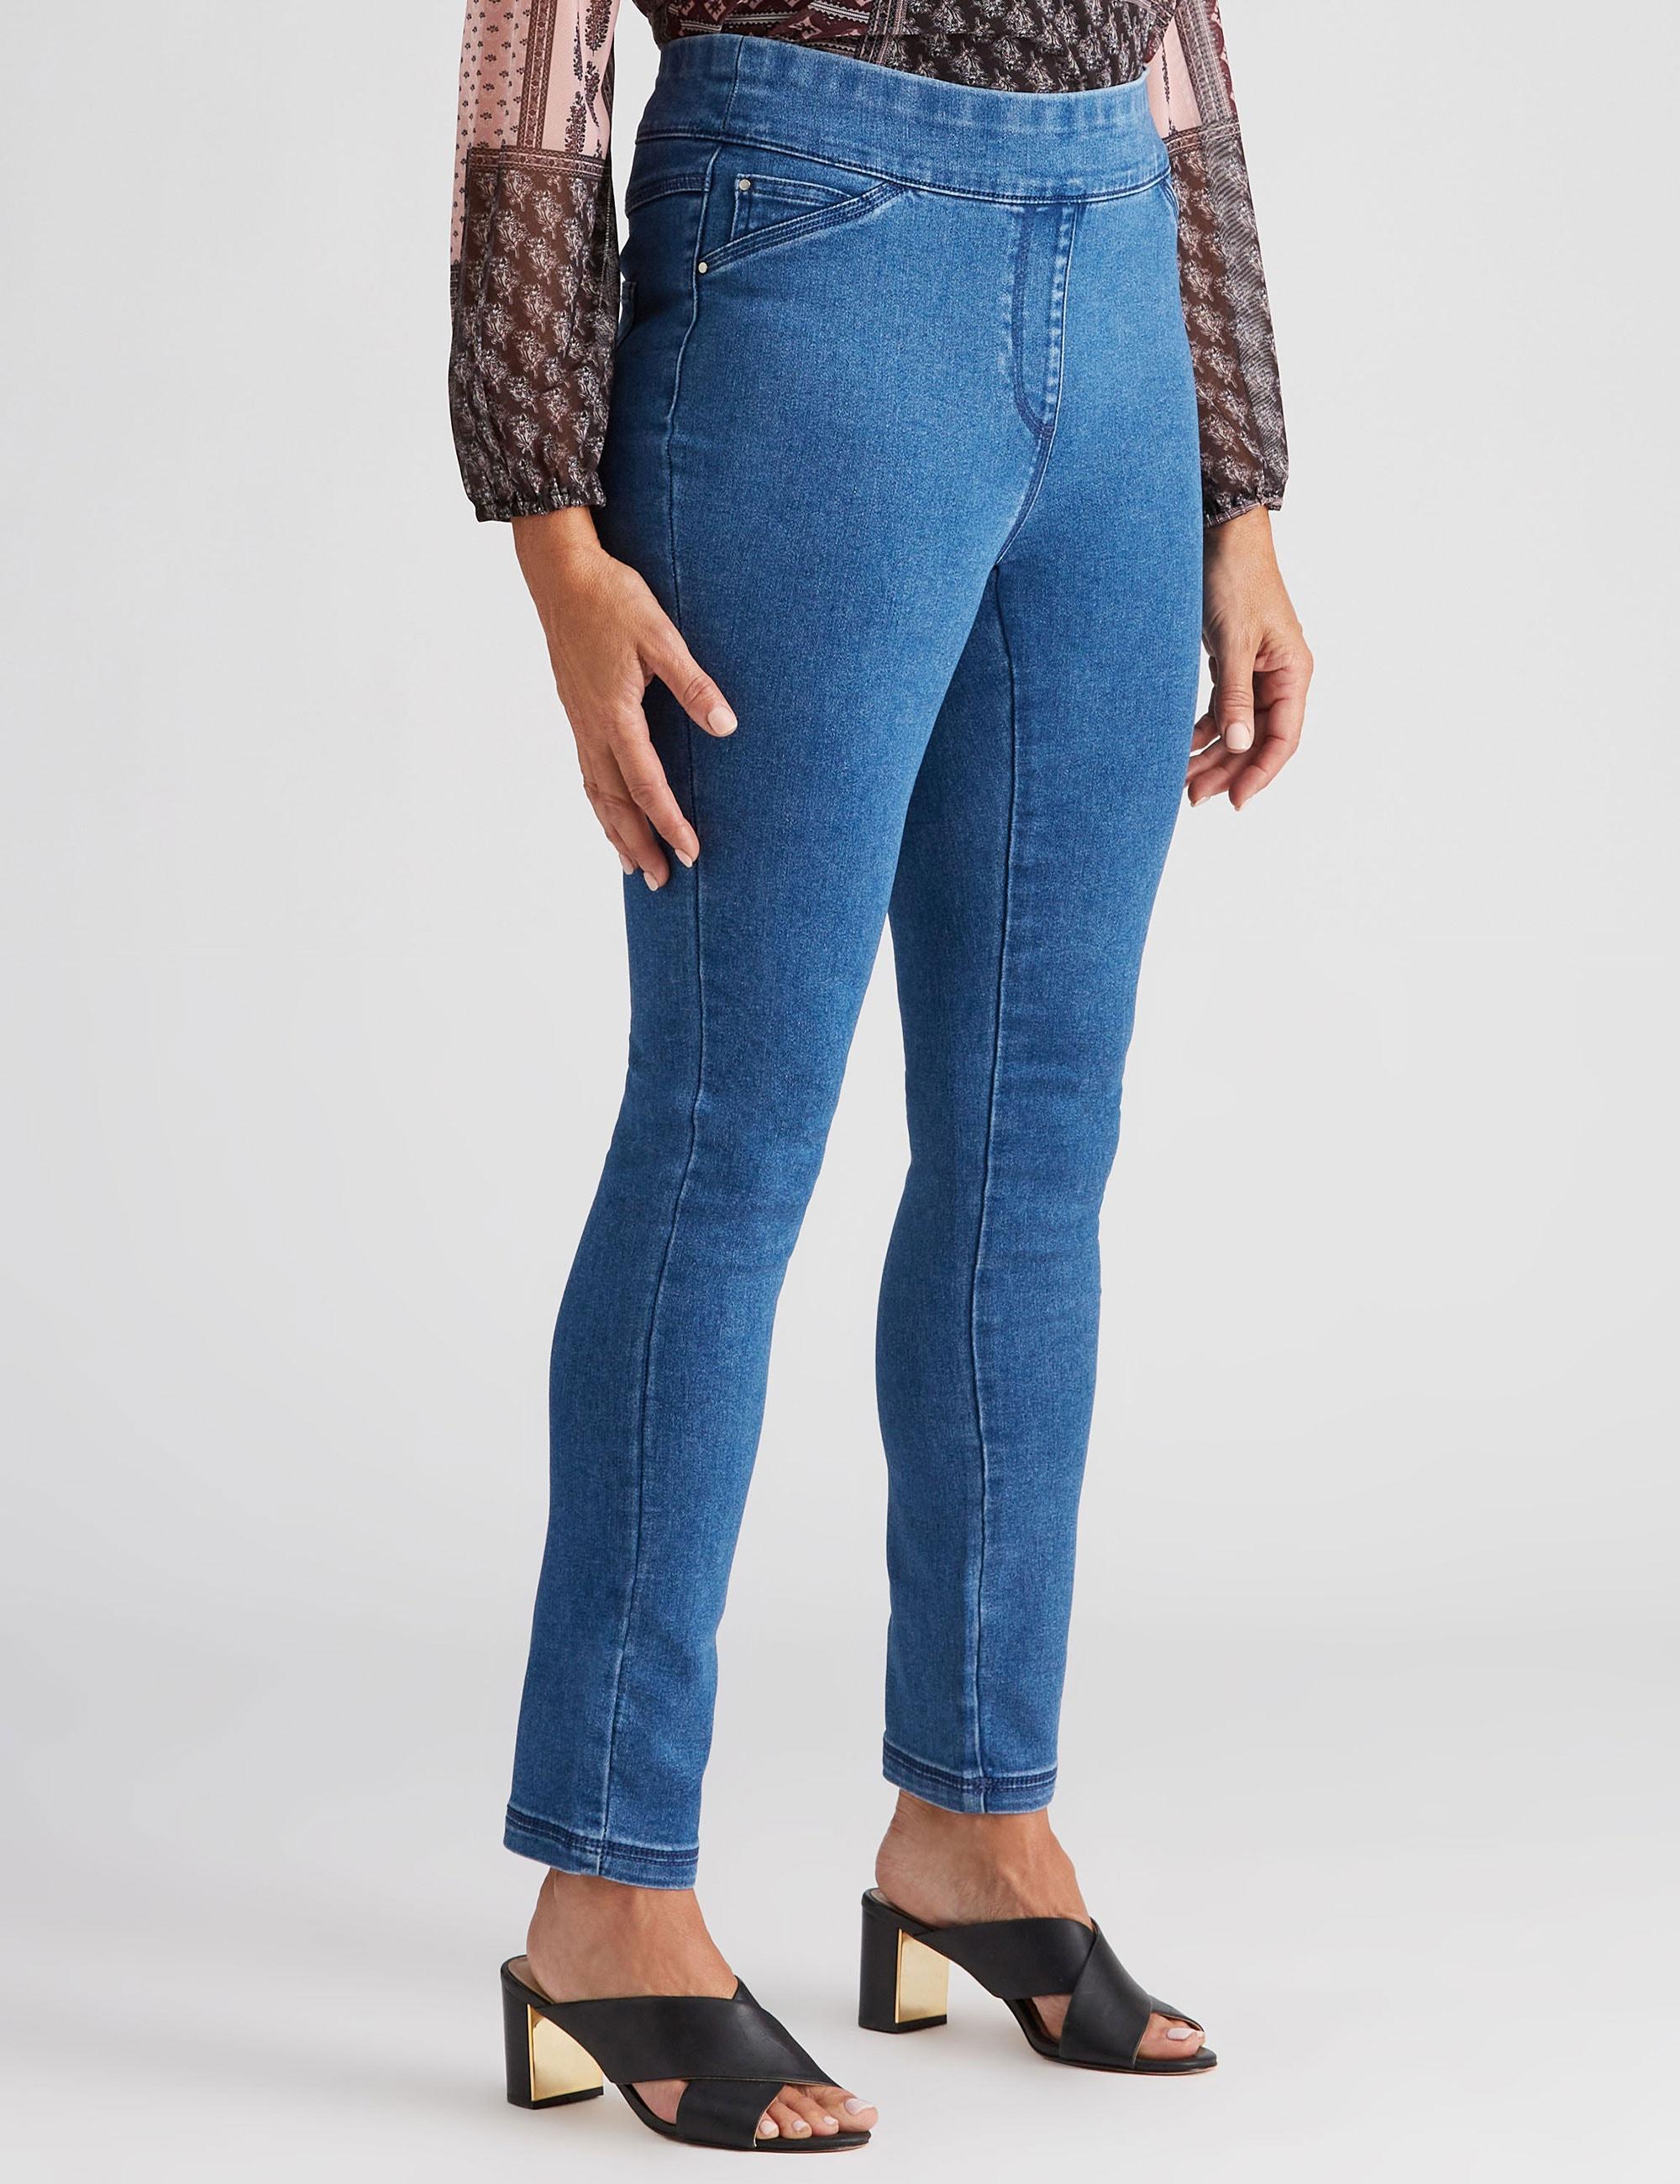 MILLERS - Womens Jeans - Blue Full Length - Denim - Cotton Pants - Fashion - All Season - Mid Wash - Elastane - Comfort Trousers - Casual Work Clothes